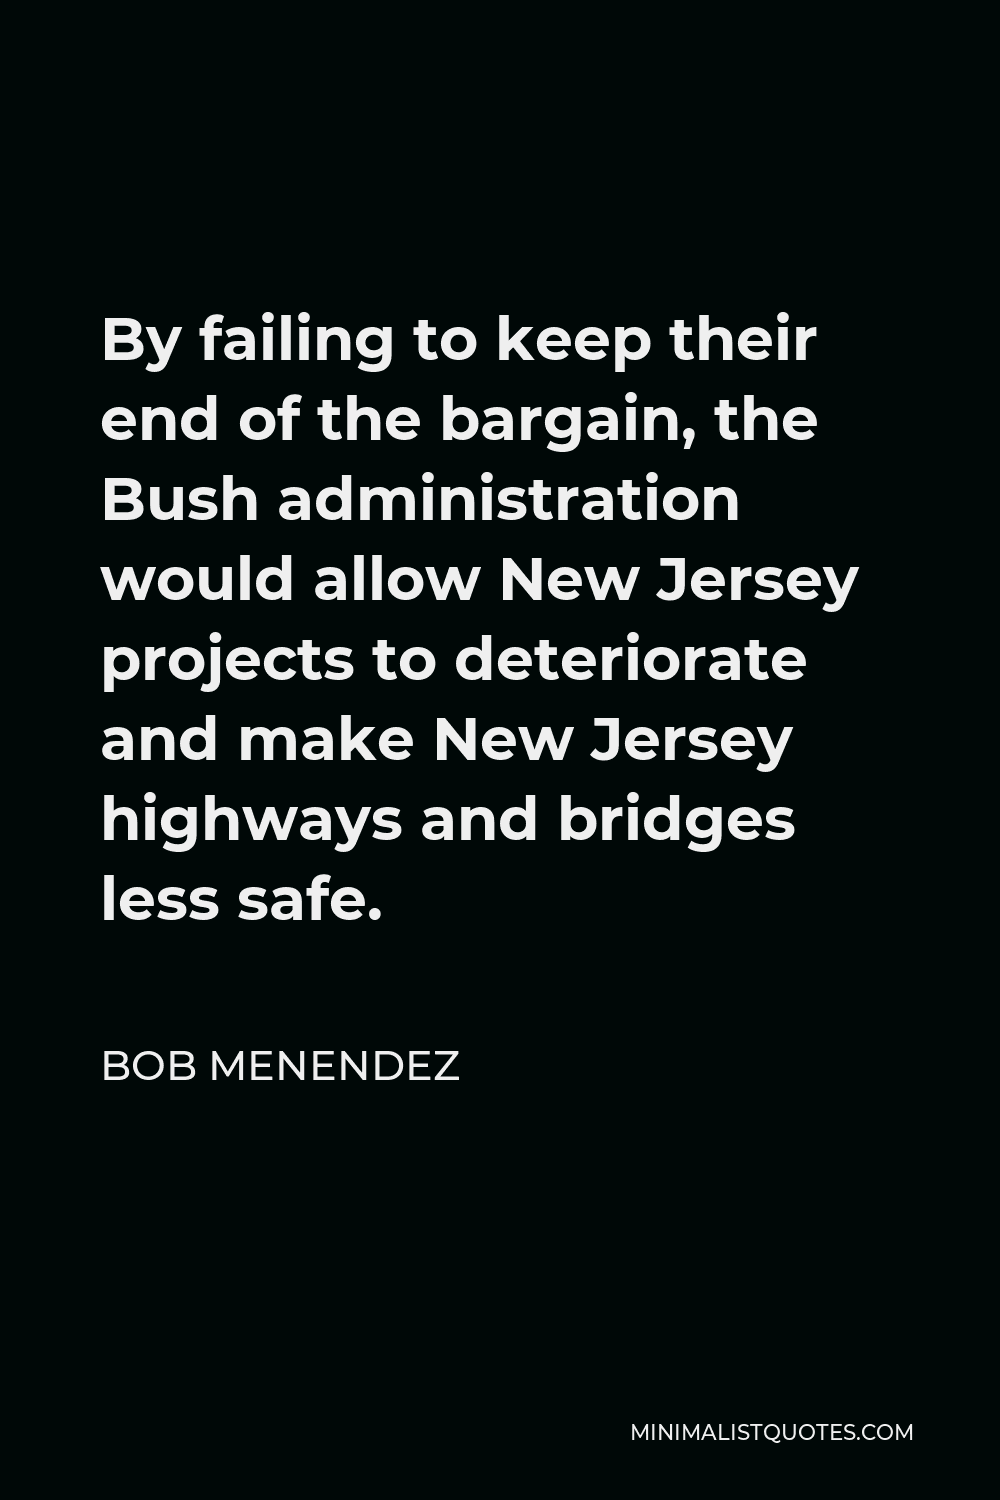 Bob Menendez Quote - By failing to keep their end of the bargain, the Bush administration would allow New Jersey projects to deteriorate and make New Jersey highways and bridges less safe.